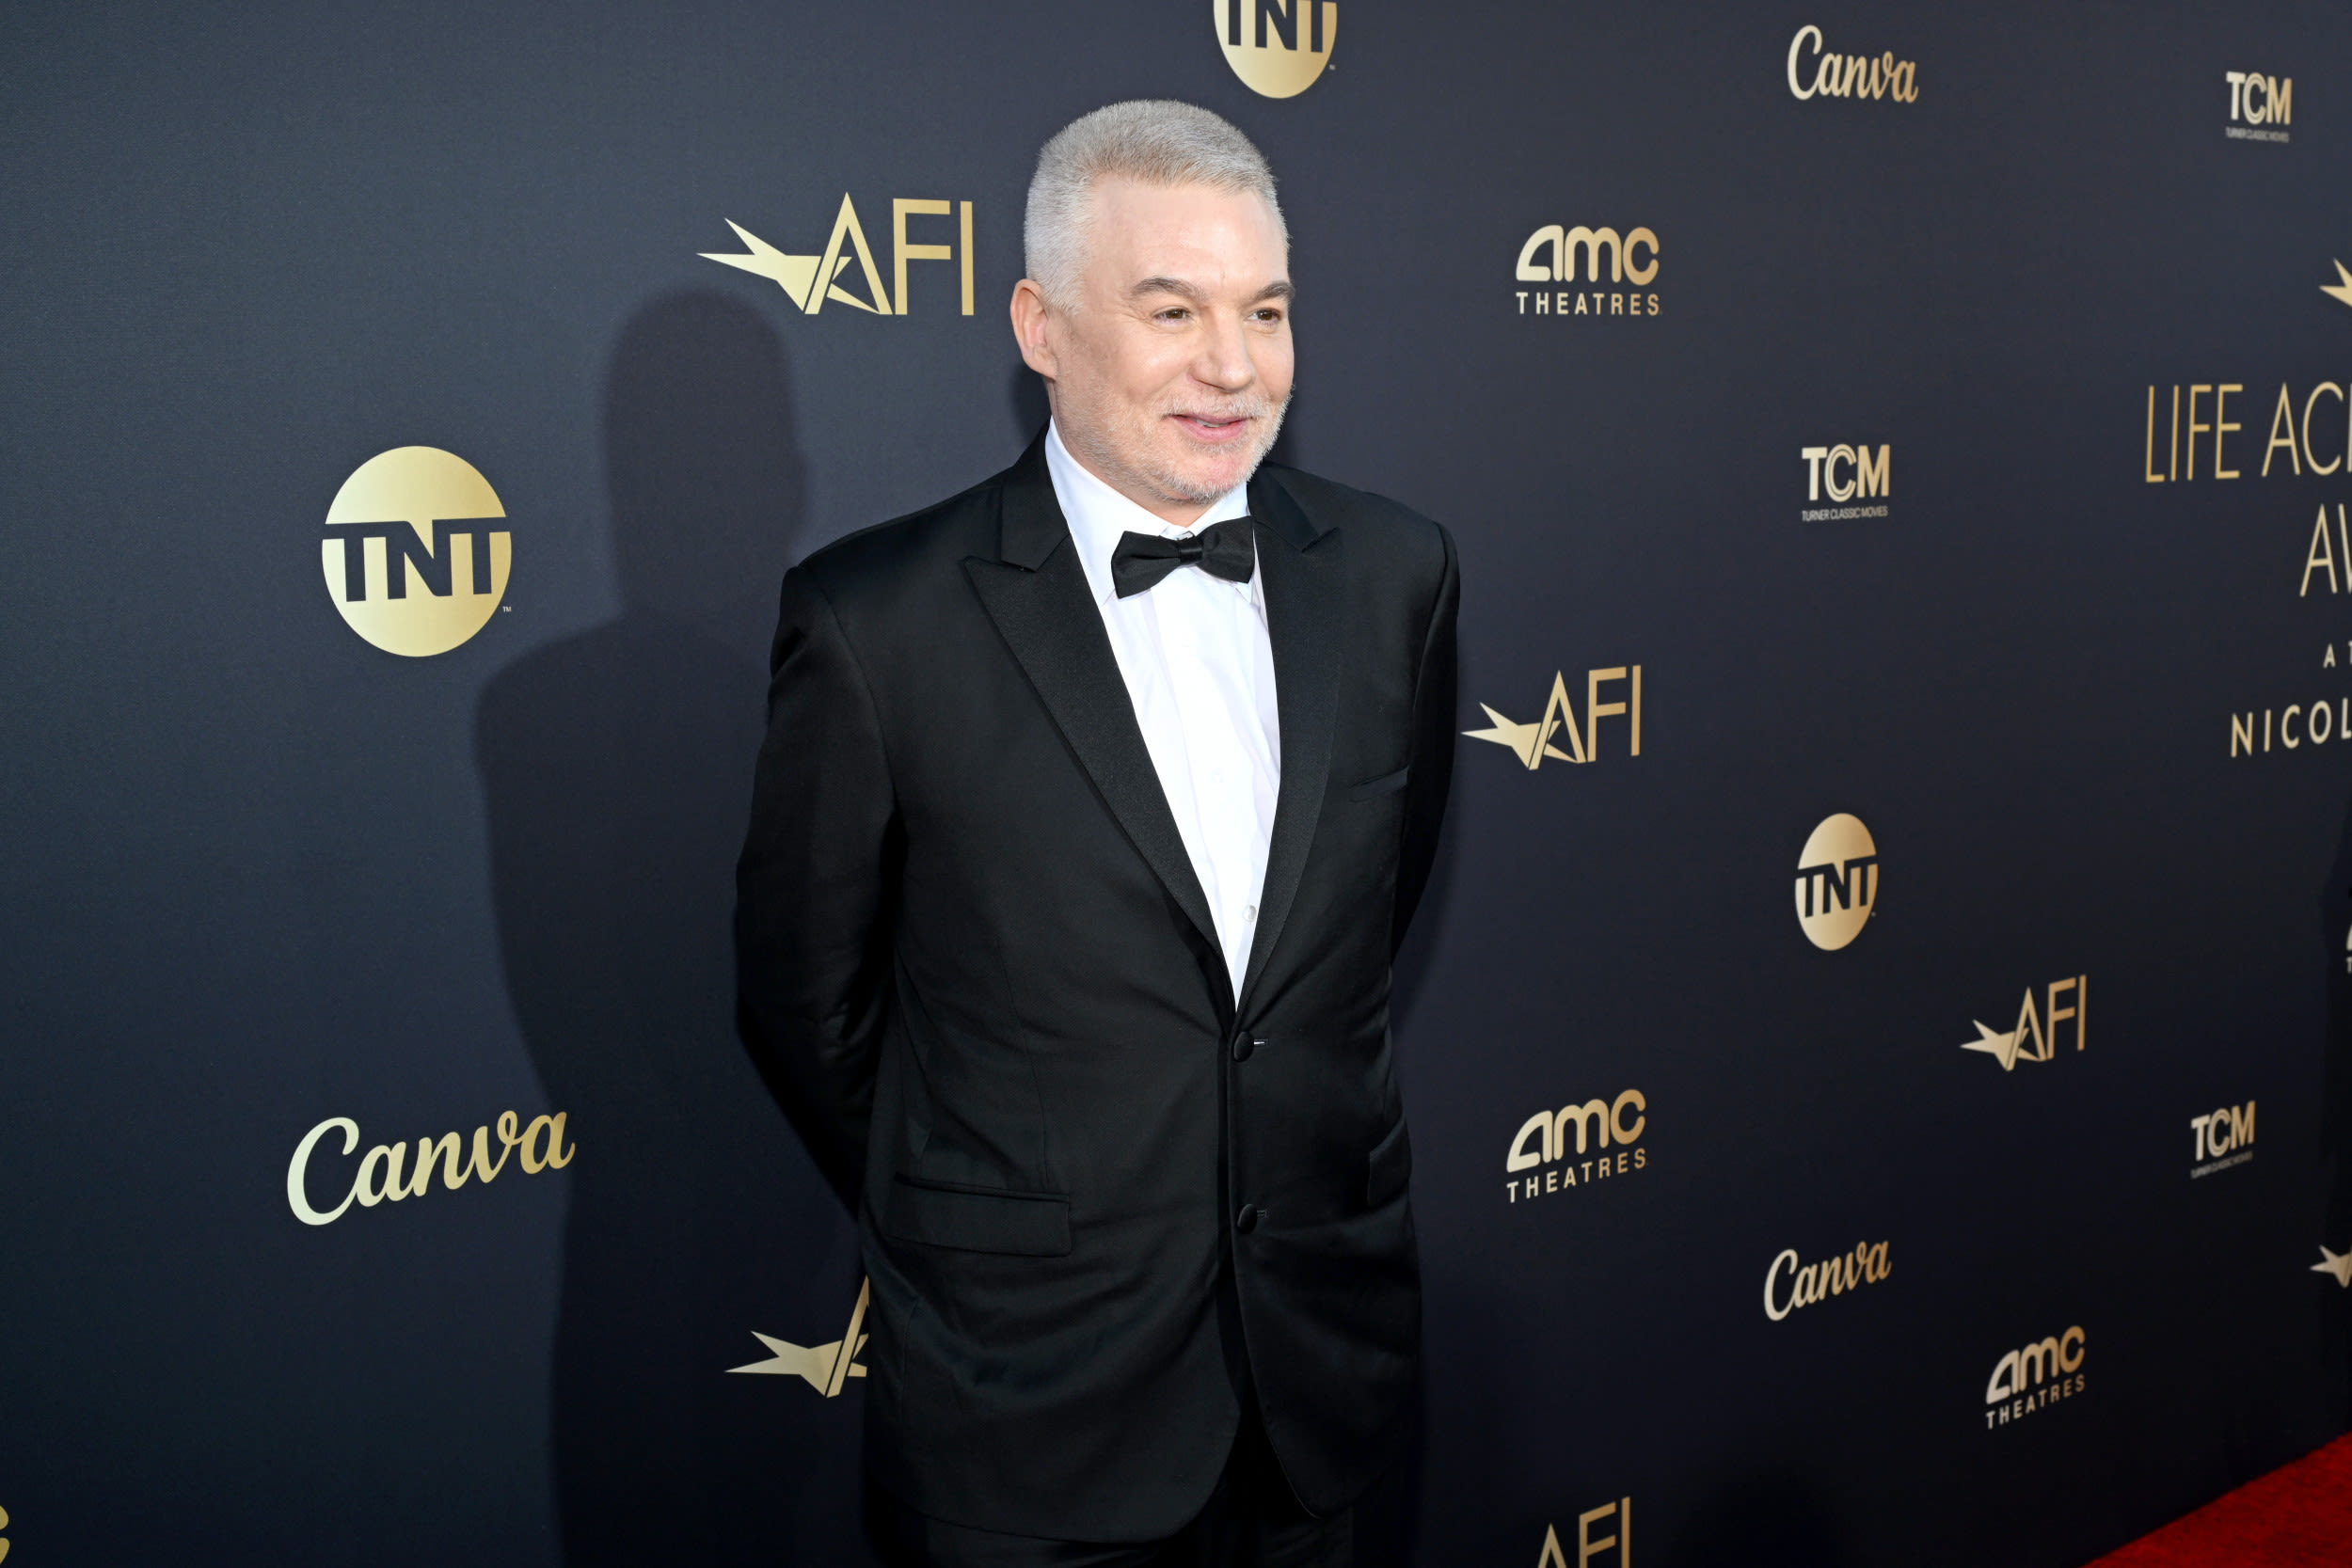 Mike Myers steps out as a silver fox for rare red carpet appearance